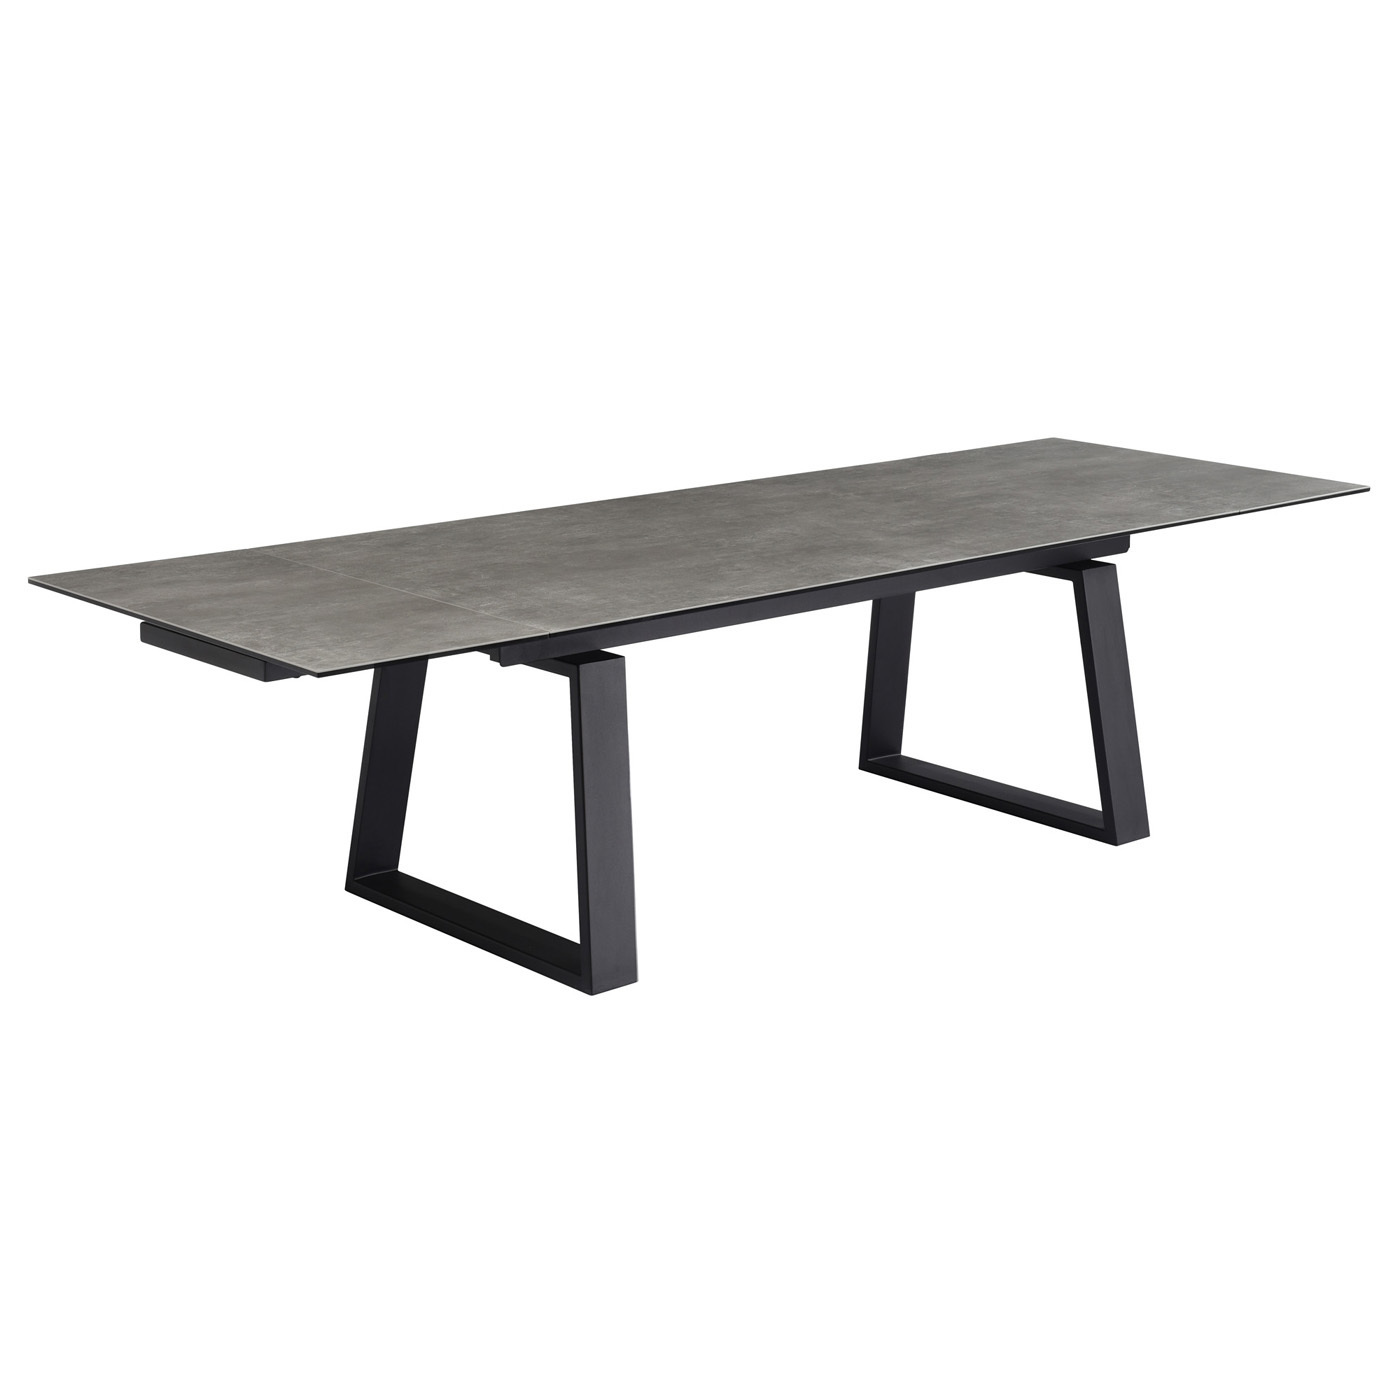 Zena Extendable Ceramic Outdoor Dining Table